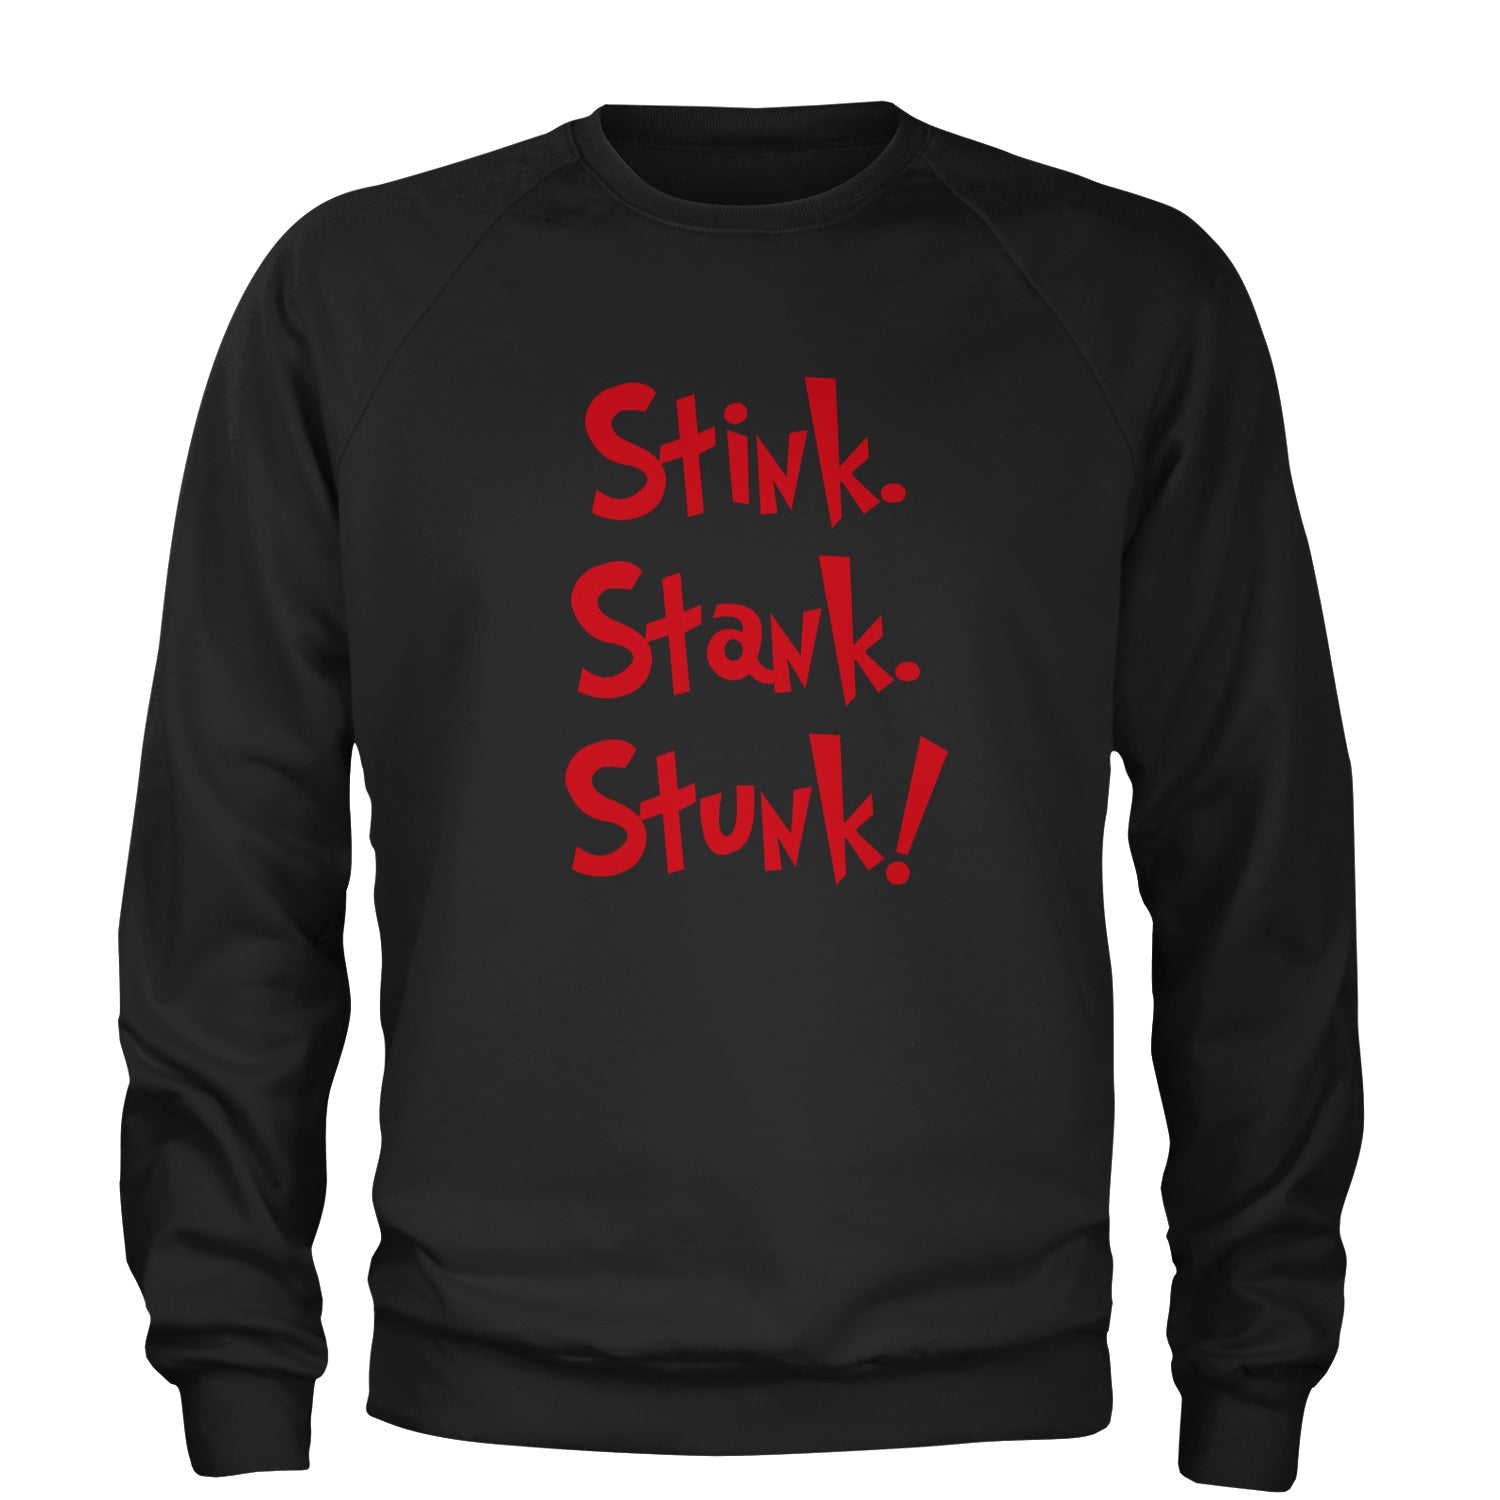 Stink Stank Stunk Grinch Adult Crewneck Sweatshirt christmas, holiday, sweater, ugly, xmas by Expression Tees